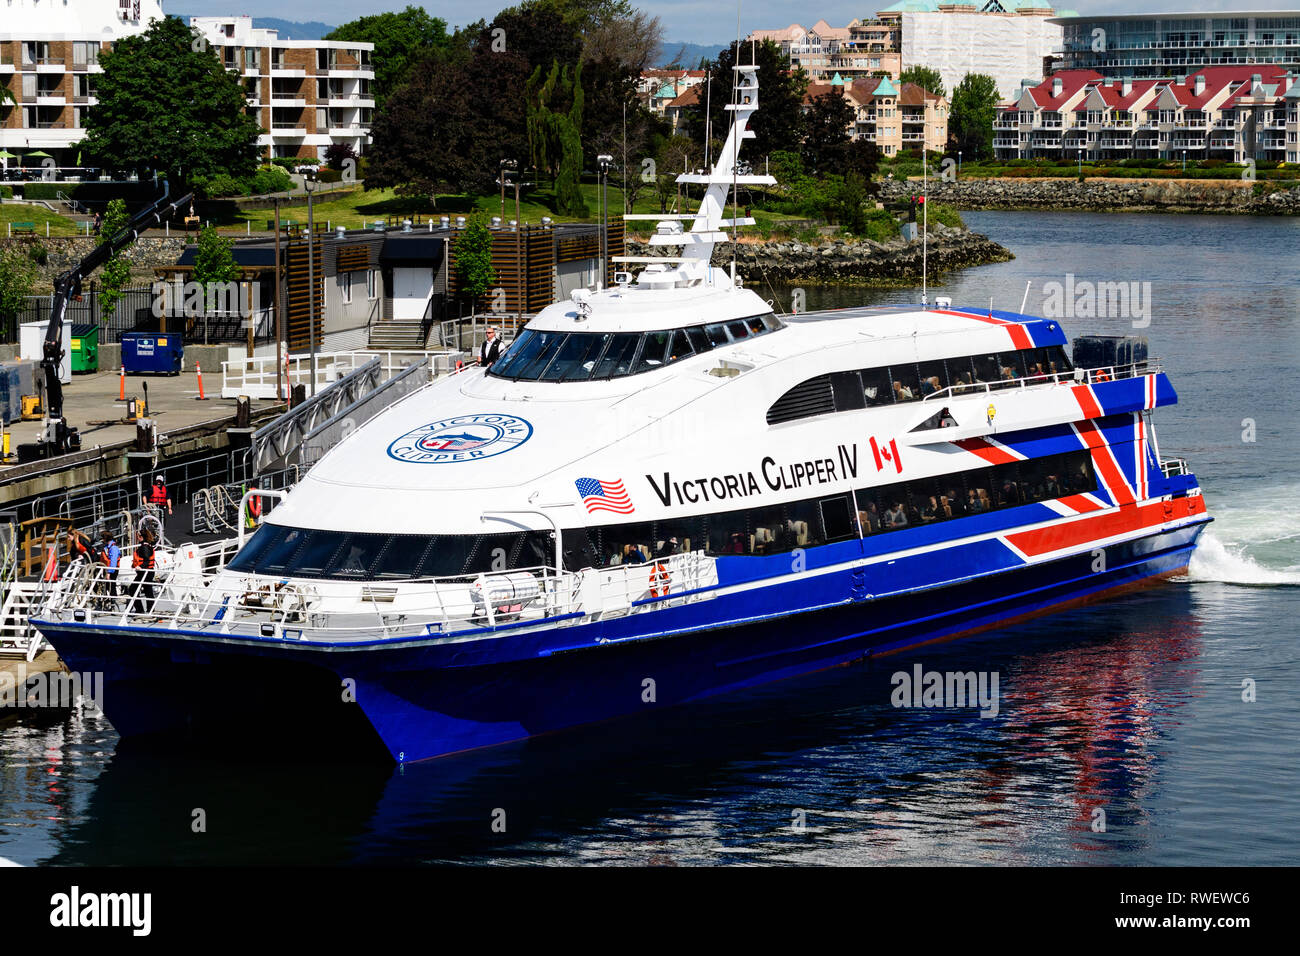 The Victoria Clipper IV arriving in the Inner Harbour at Victoria, British Columbia Stock Photo